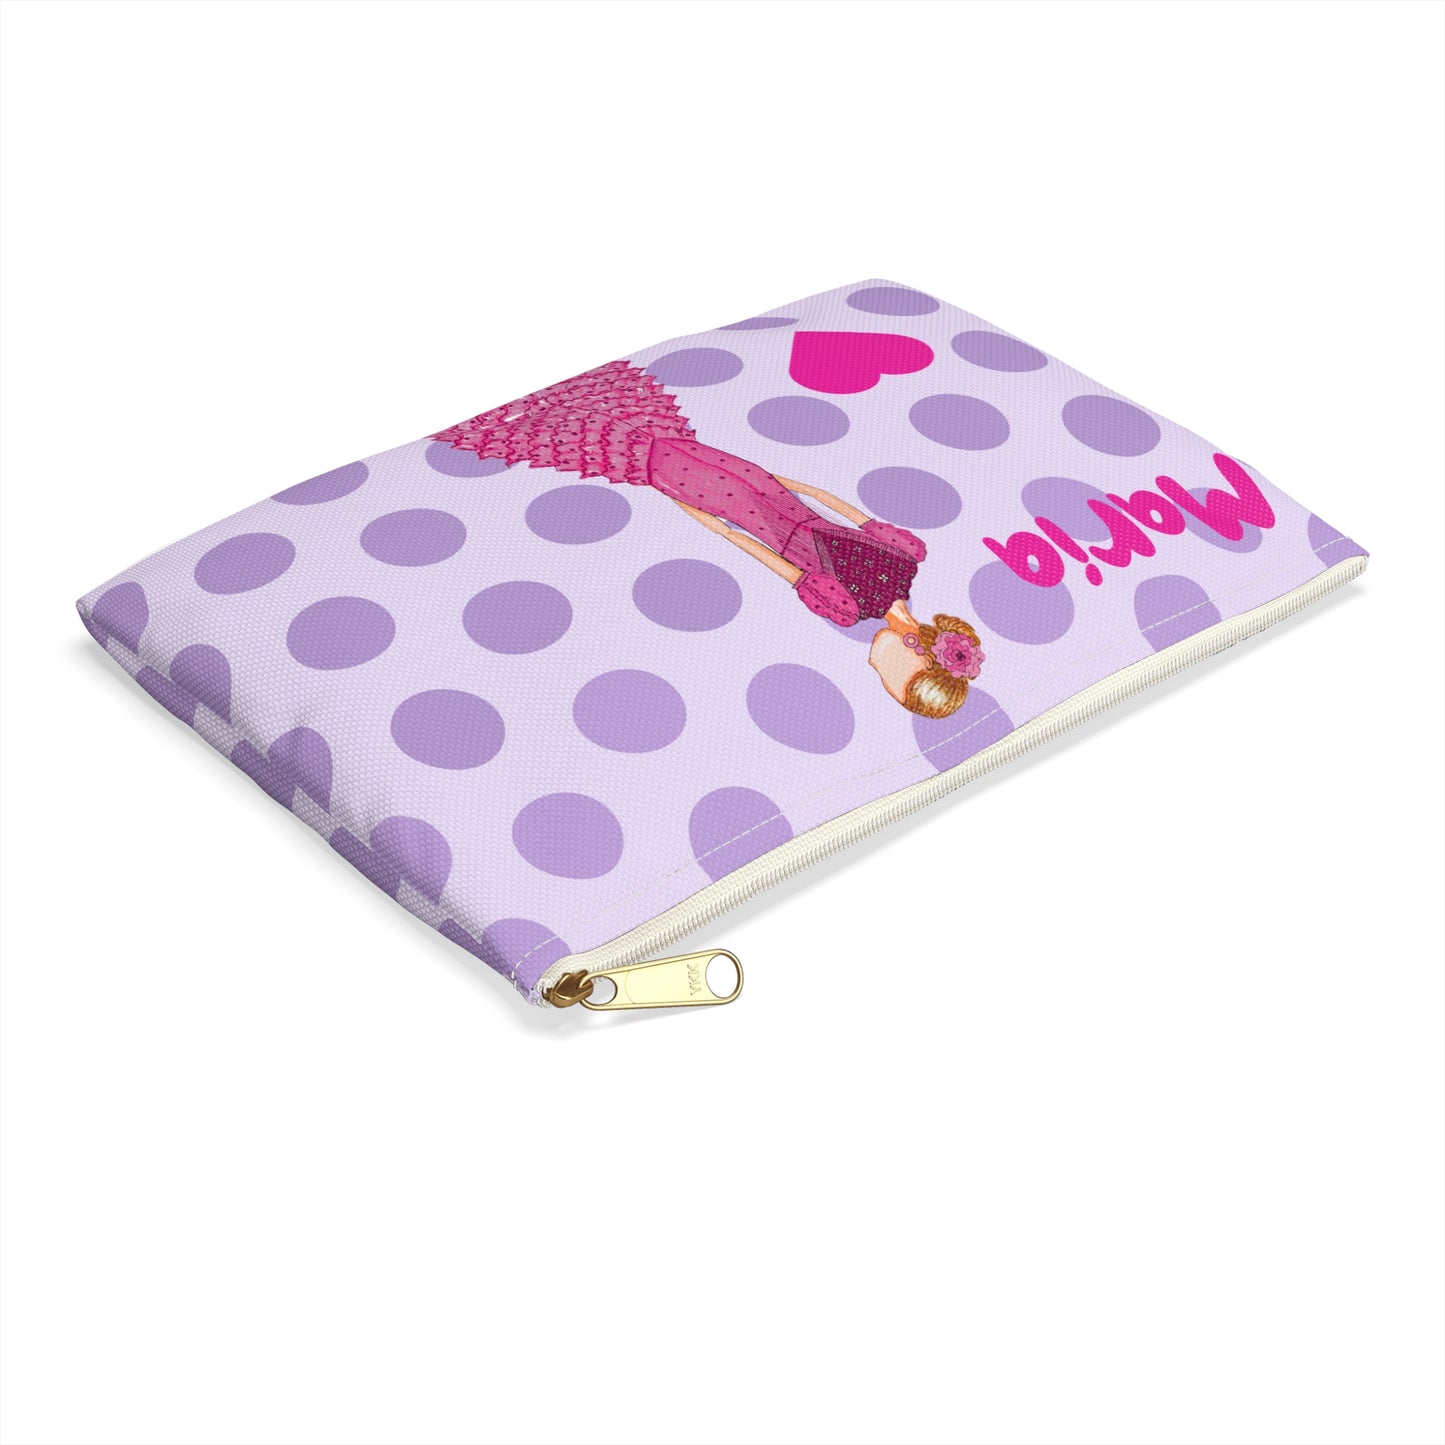 a purple and white polka dot covered book with a picture of a woman on it